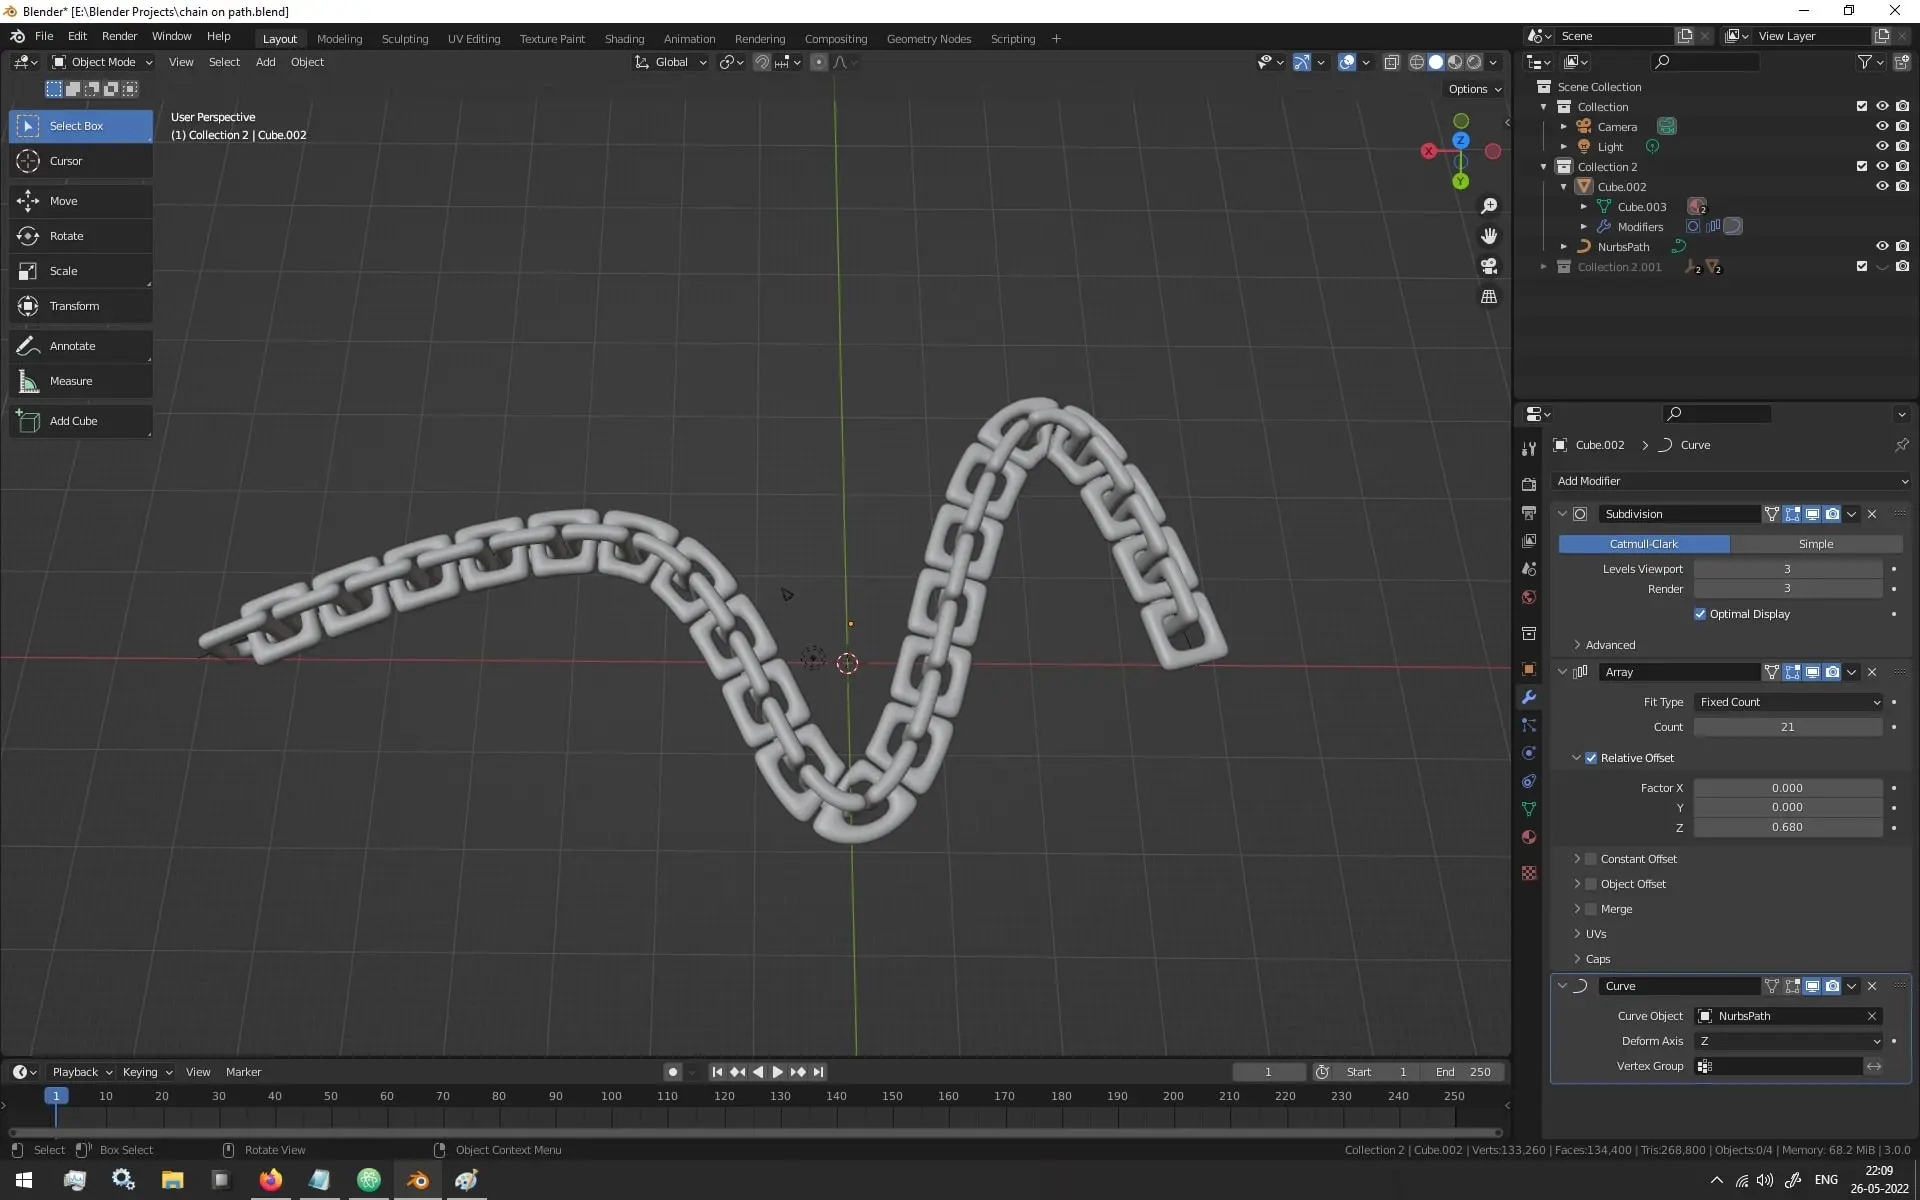 How to make a 3D Model or an Array of 3D Model Follow A Curve - Step 4 - Adding Curve Modifier to the 3D Model